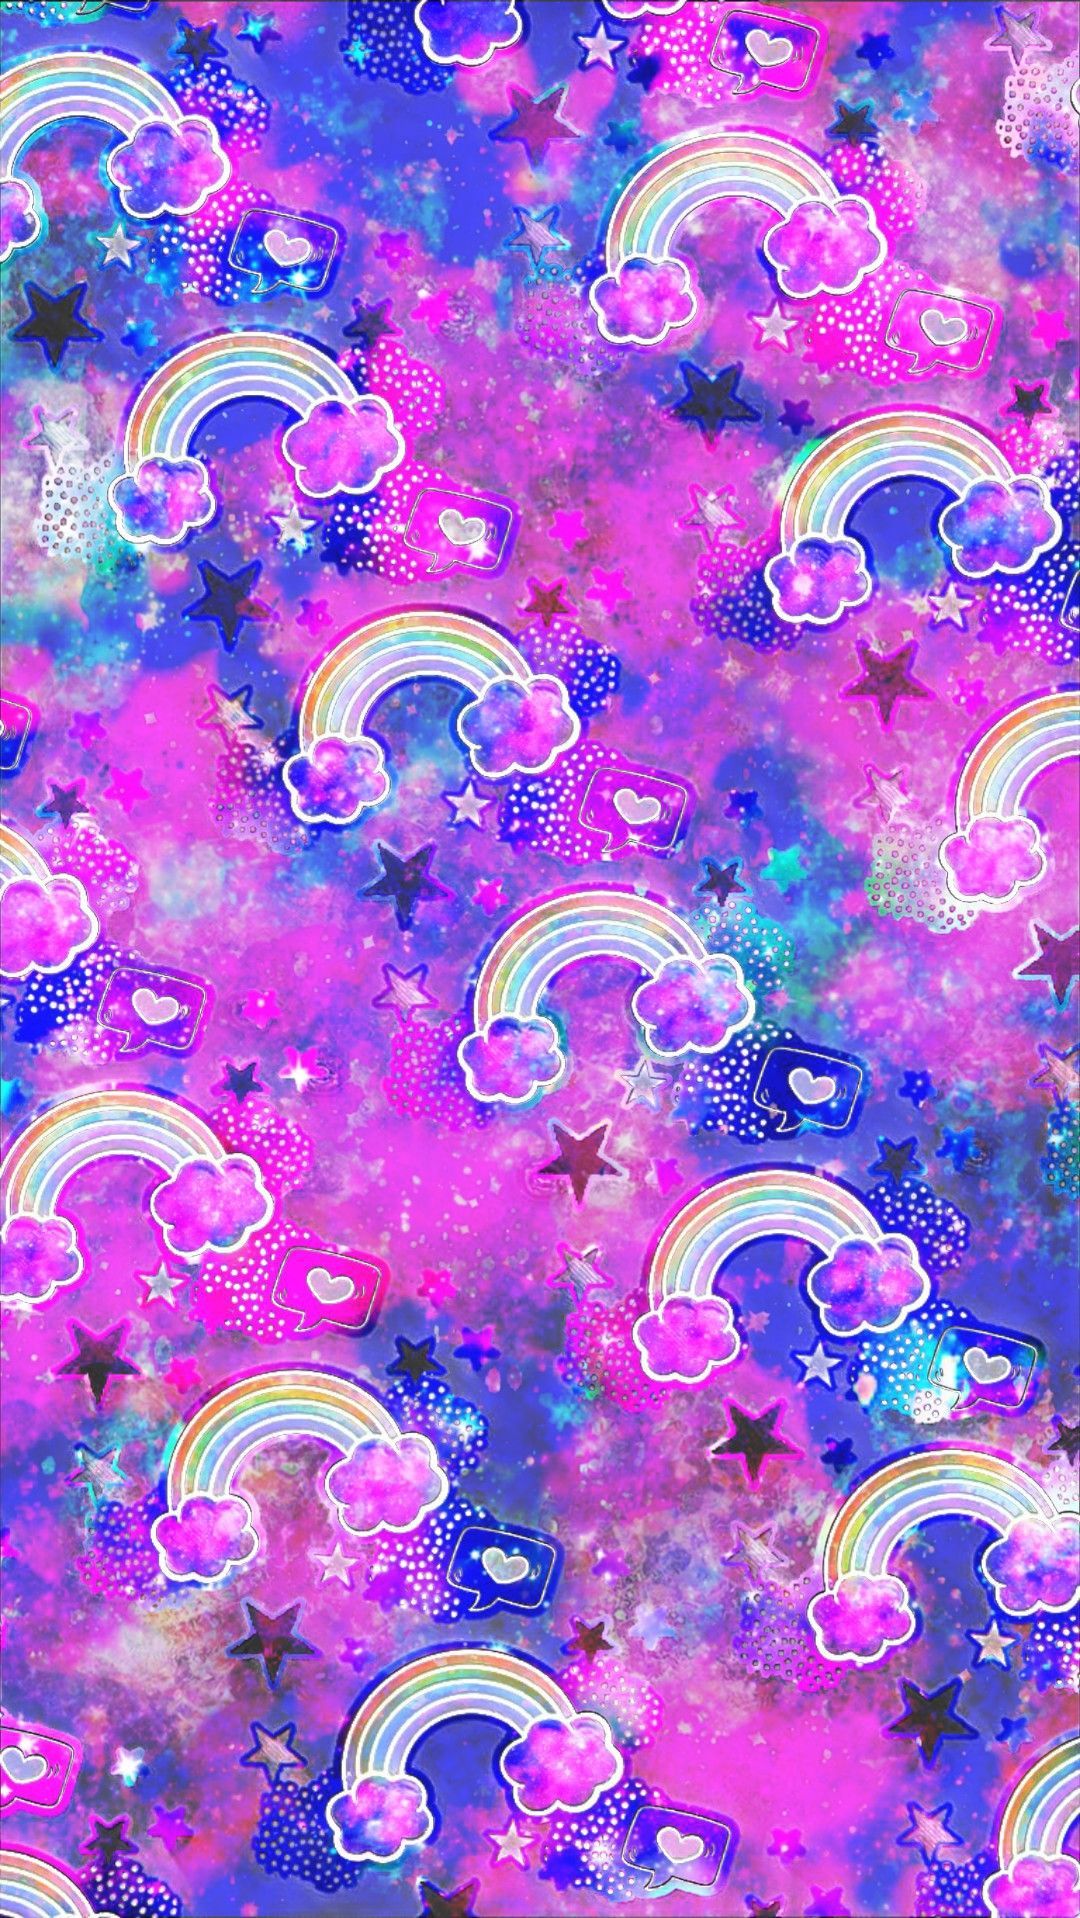 Rainbow Emojis Galaxy, made by me #purple #sparkly #wallpaper #background #sparkles #glittery #galaxy #rai. Purple sparkly wallpaper, Rainbow wallpaper, Rainbow